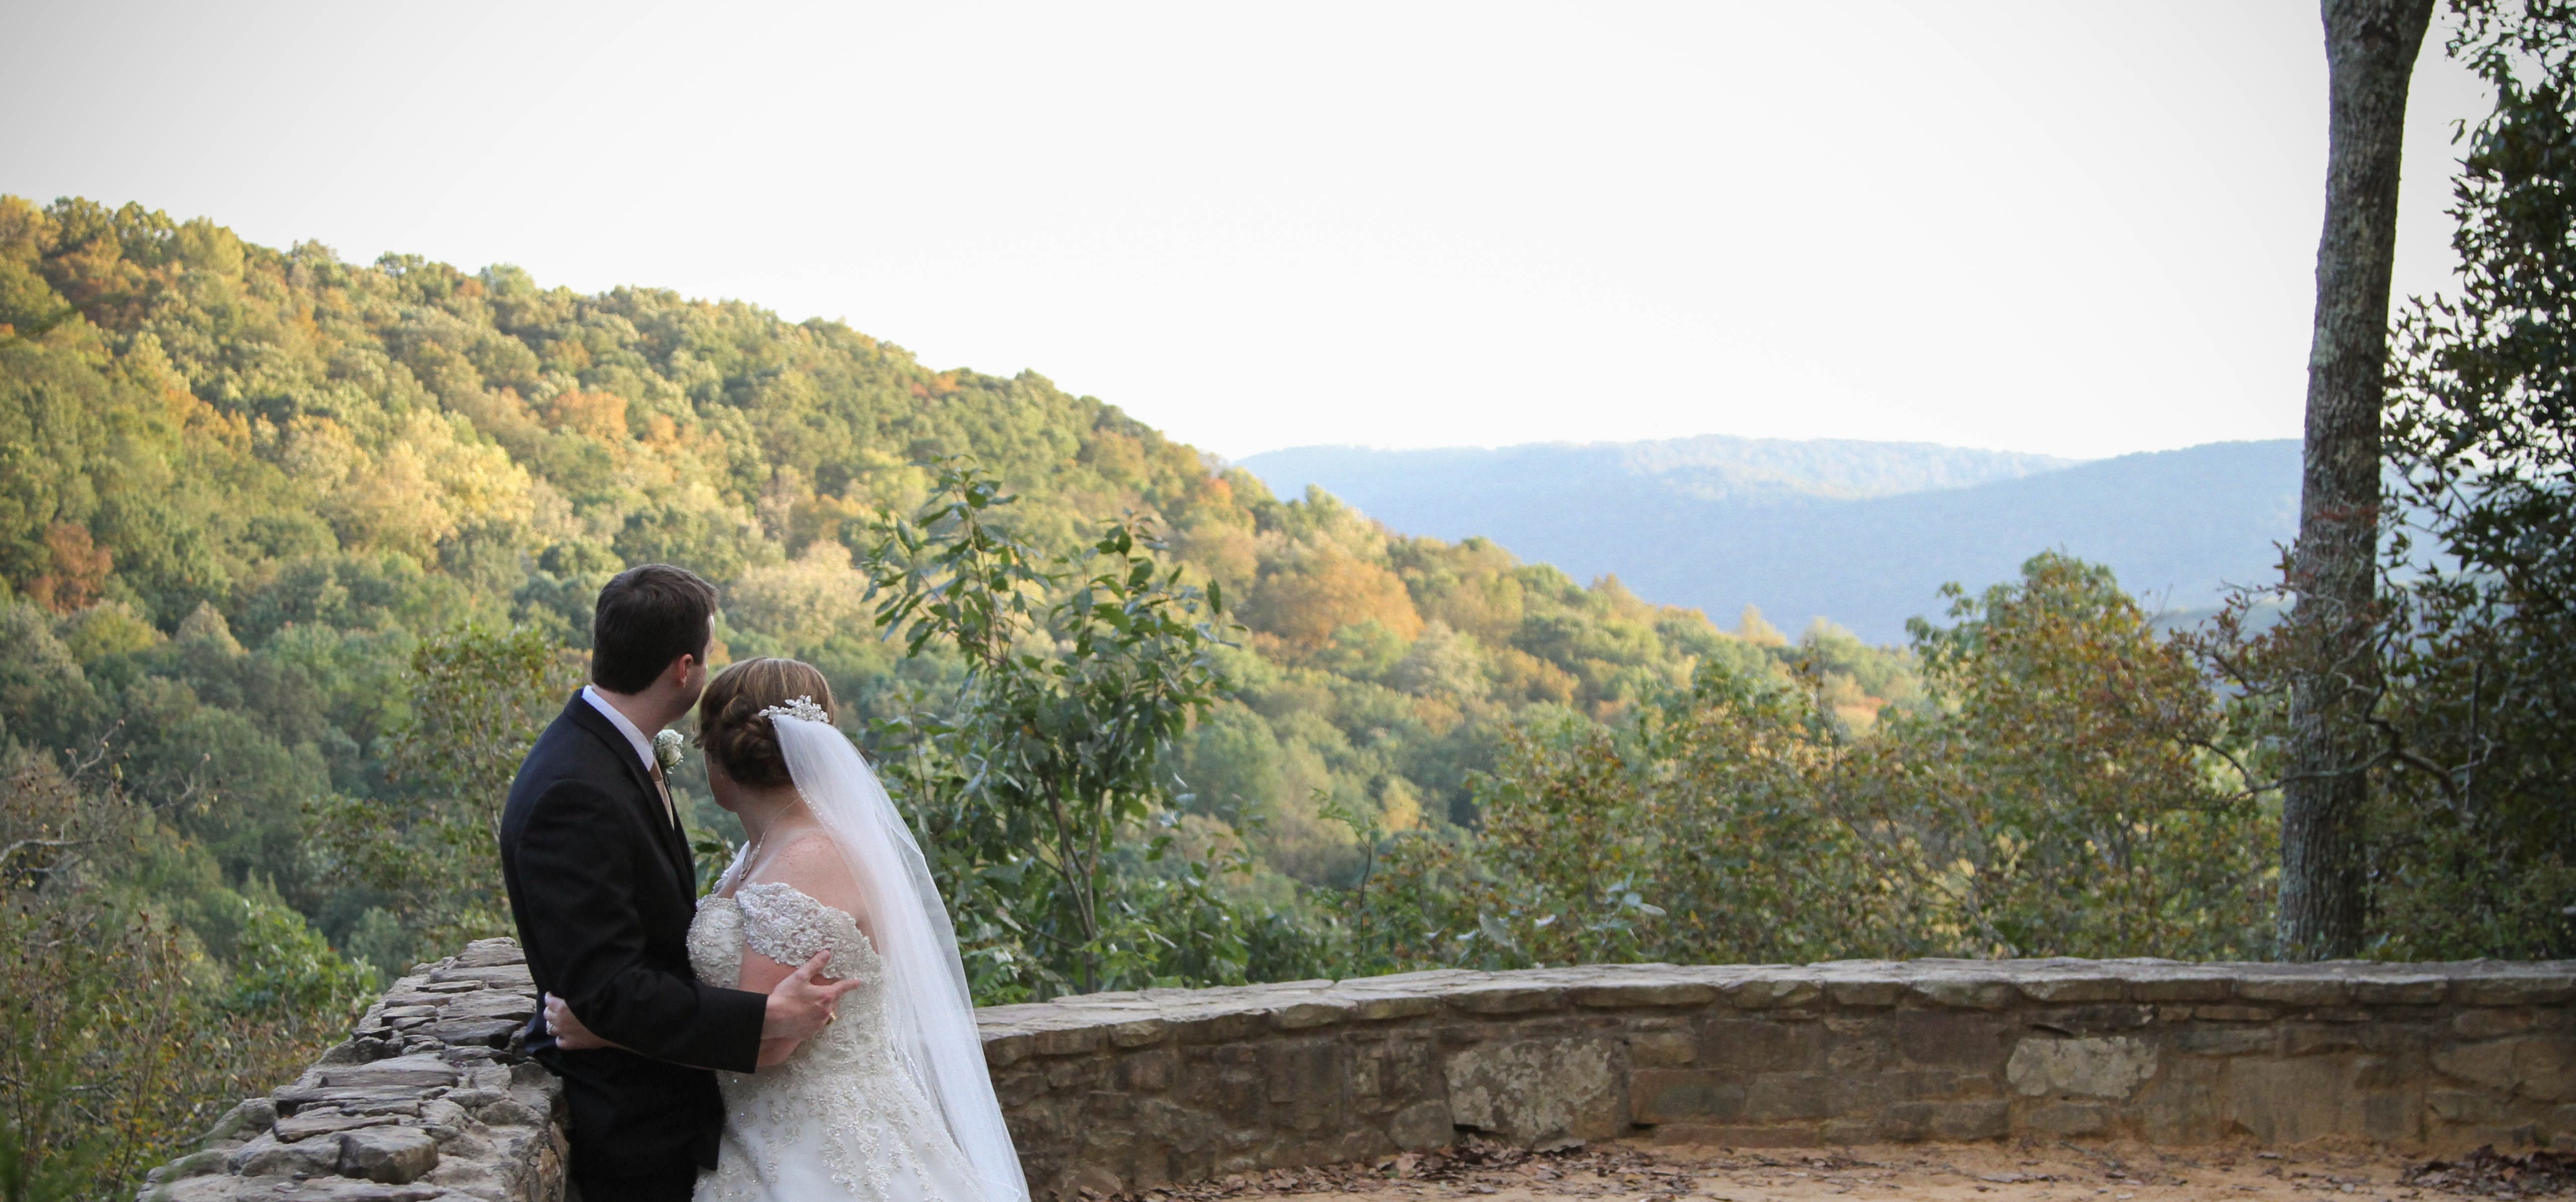 Weddings at Monte Sano State Park